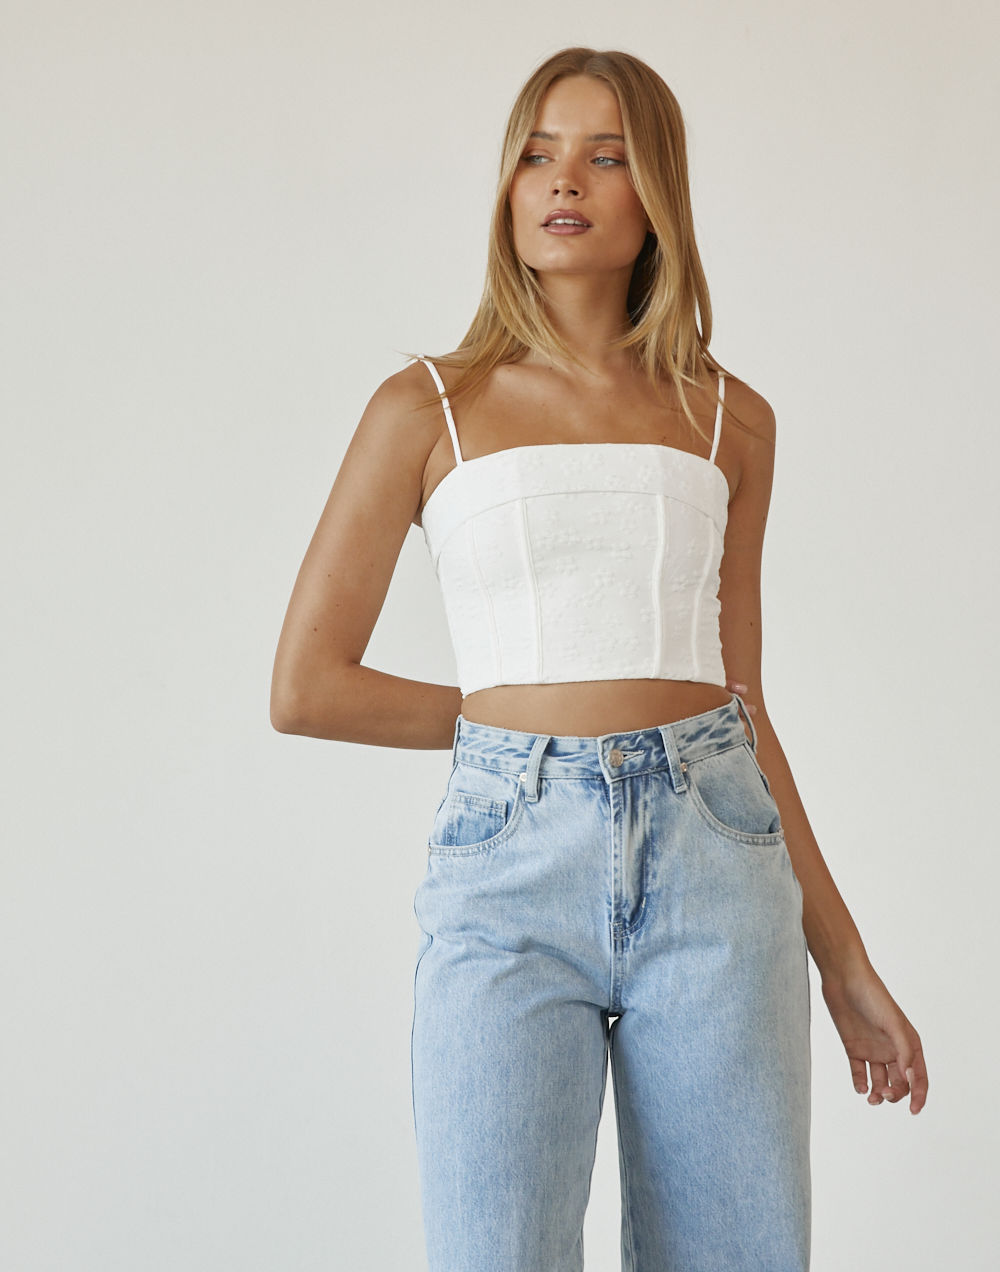 Odelle Top (White) - Corset Style Crop Top - Women's Top - Charcoal Clothing